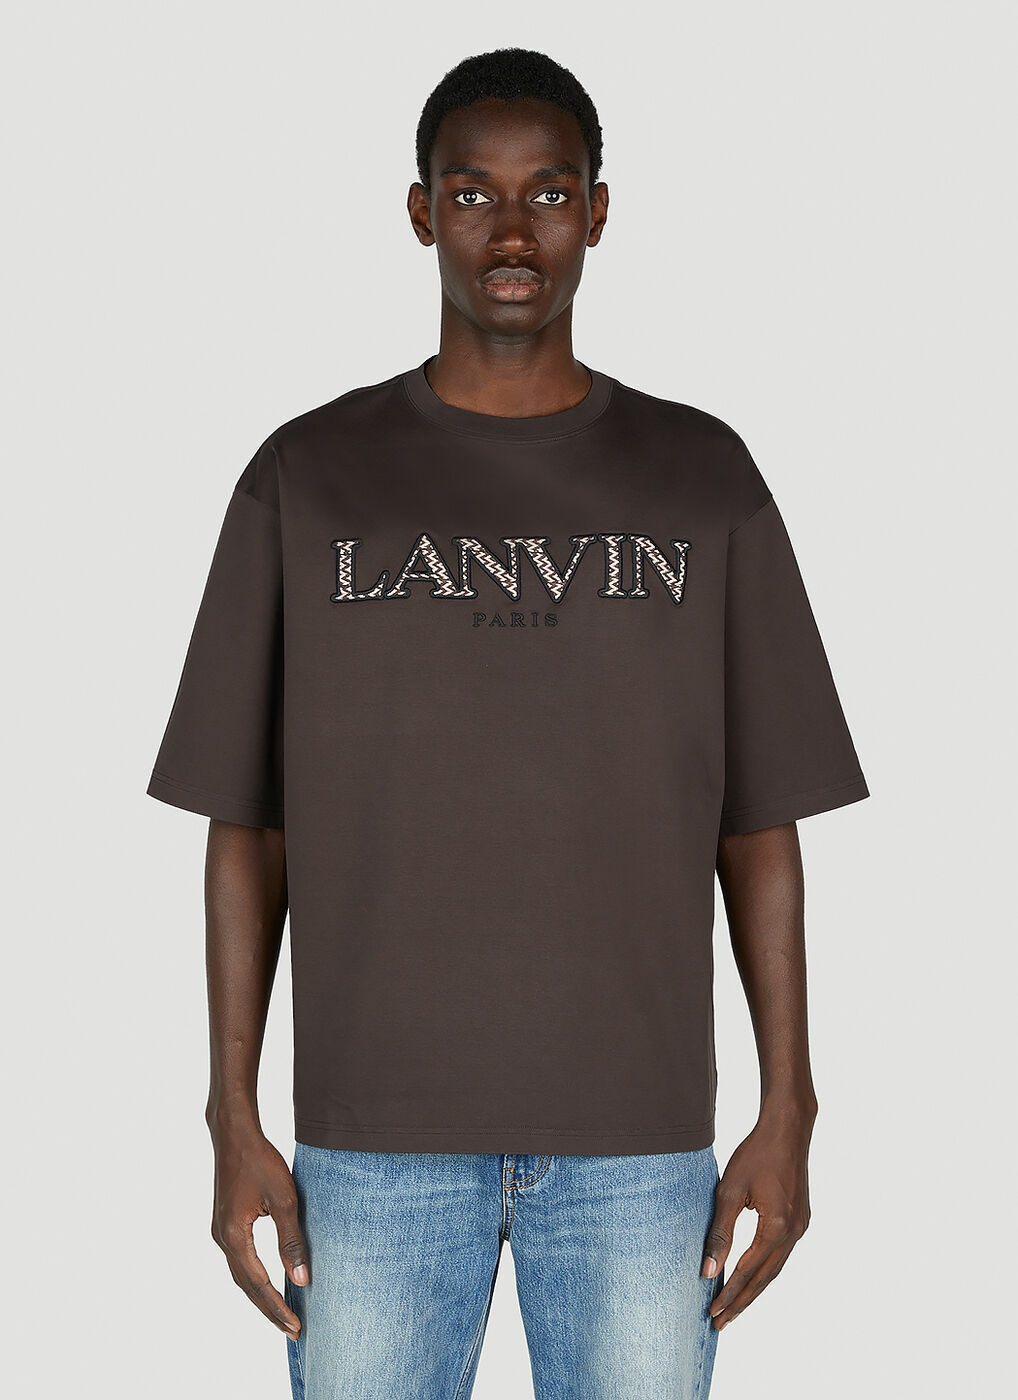 Lanvin - Logo Embroidery T-Shirt in Brown Lanvin